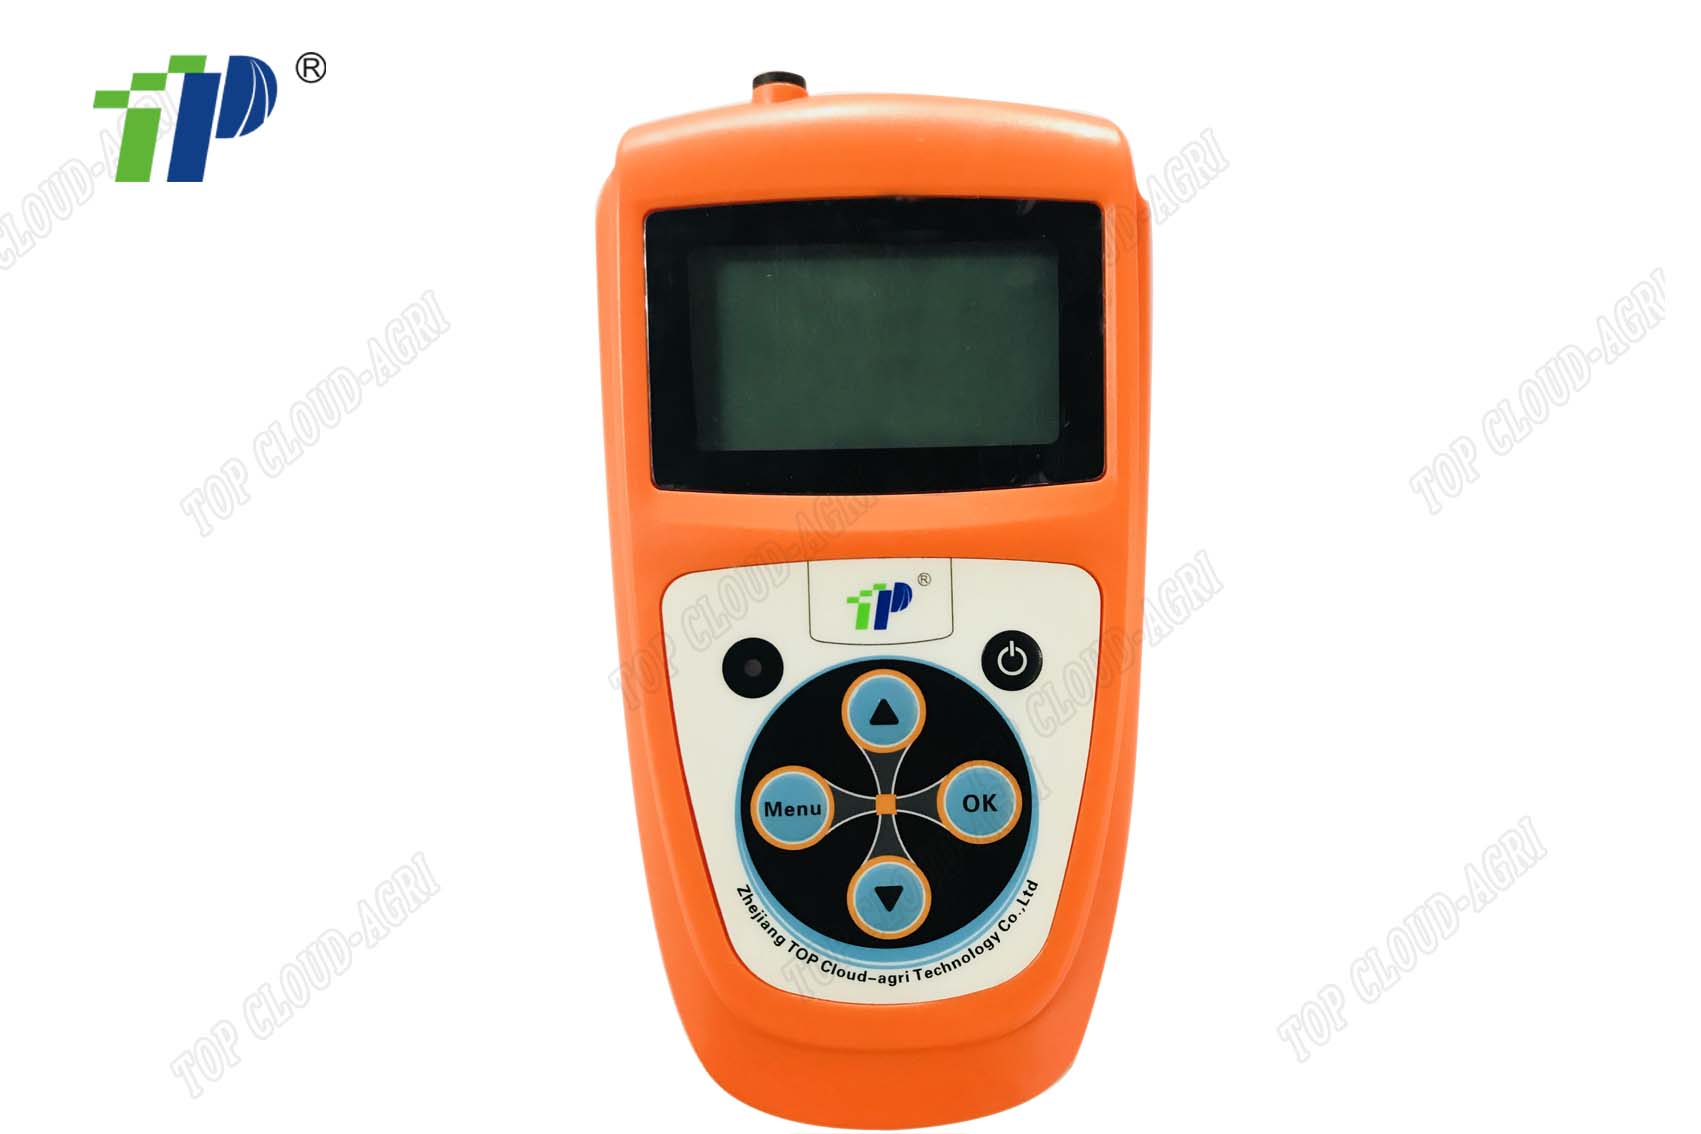 Handheld Agricultural Weather Monitor